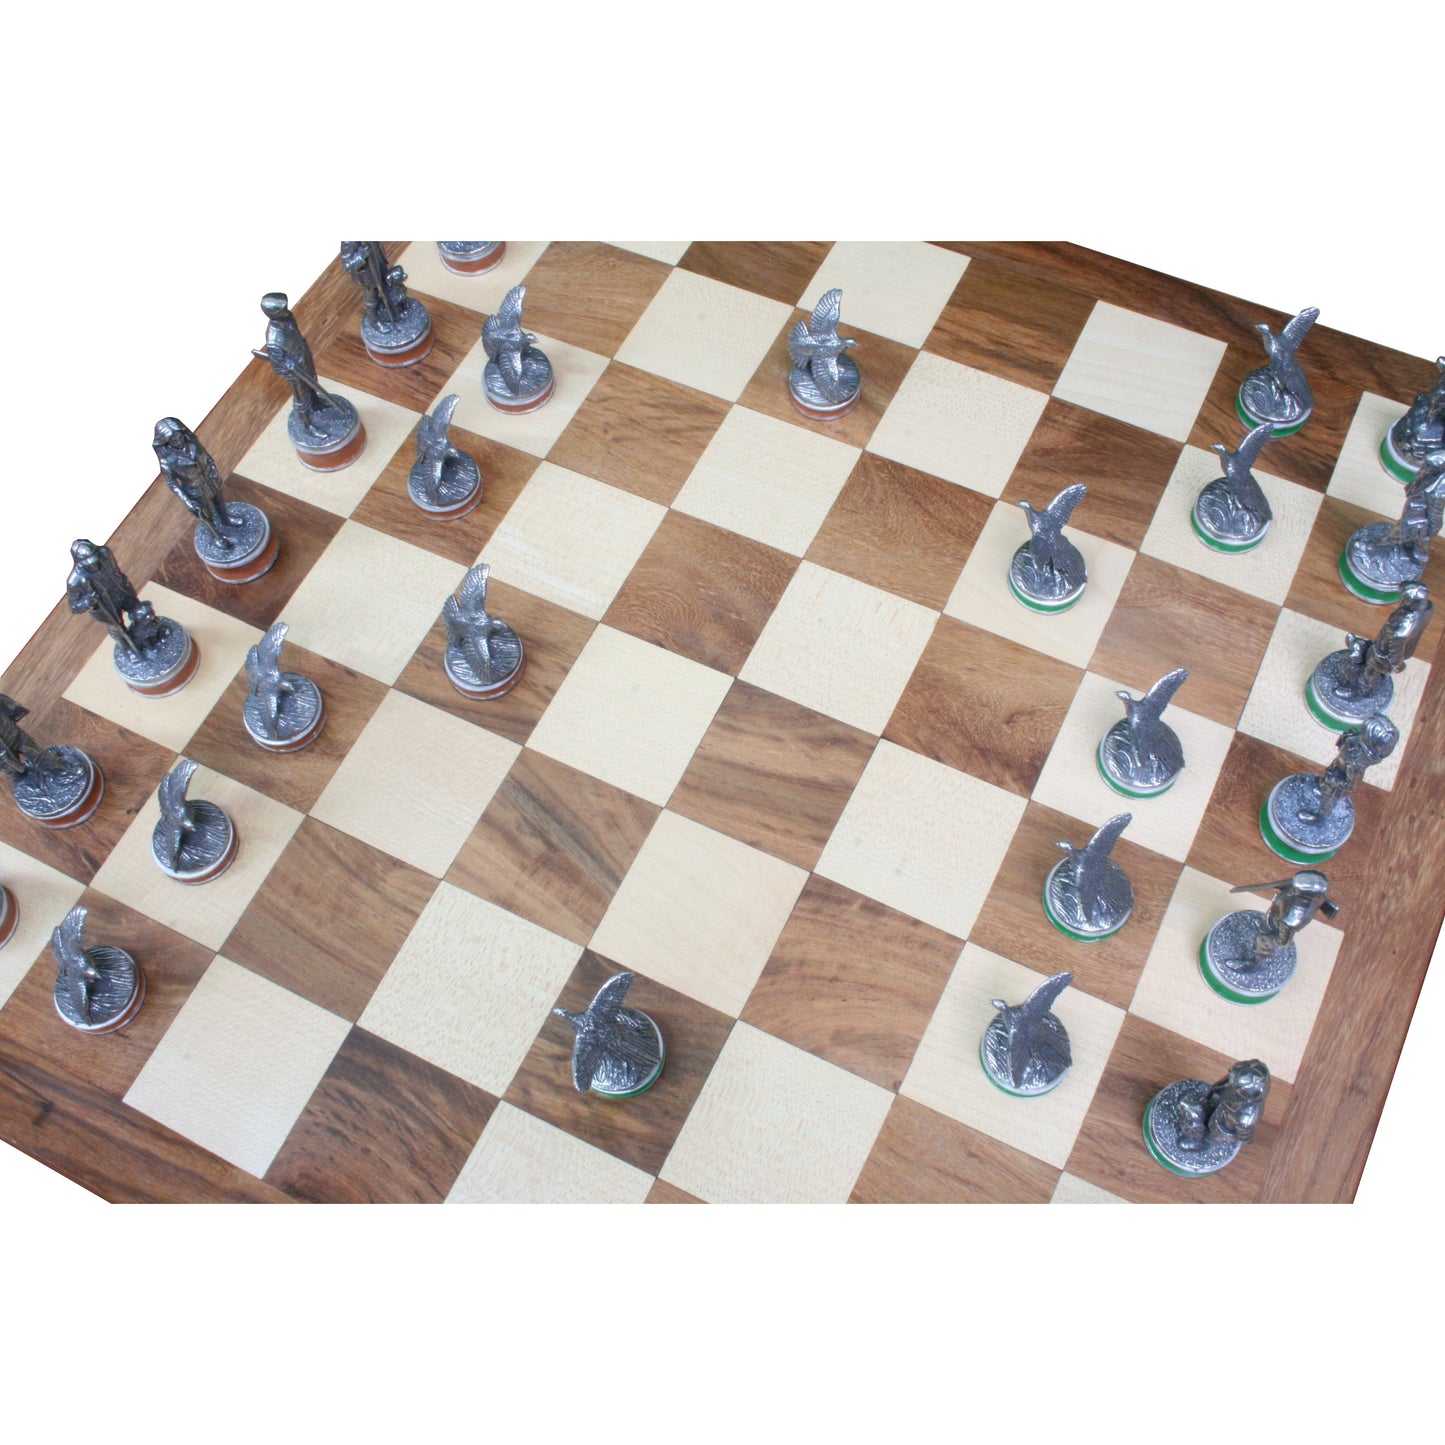 Shooting Chess Set Hand Cast In English Pewter